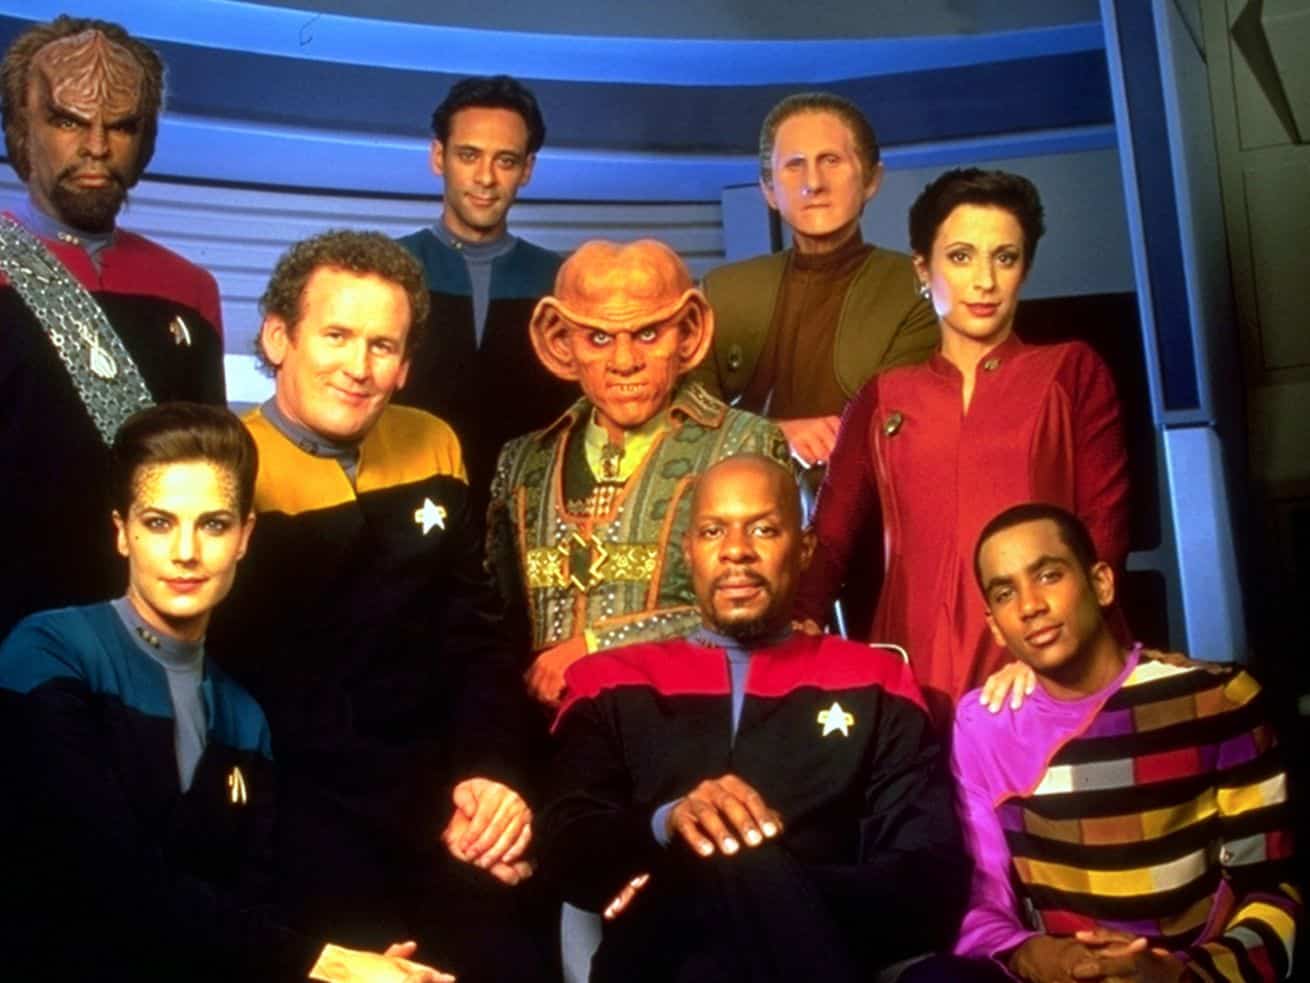 Star Trek: Deep Space Nine accidentally predicted the 2020s by writing about the 1990s